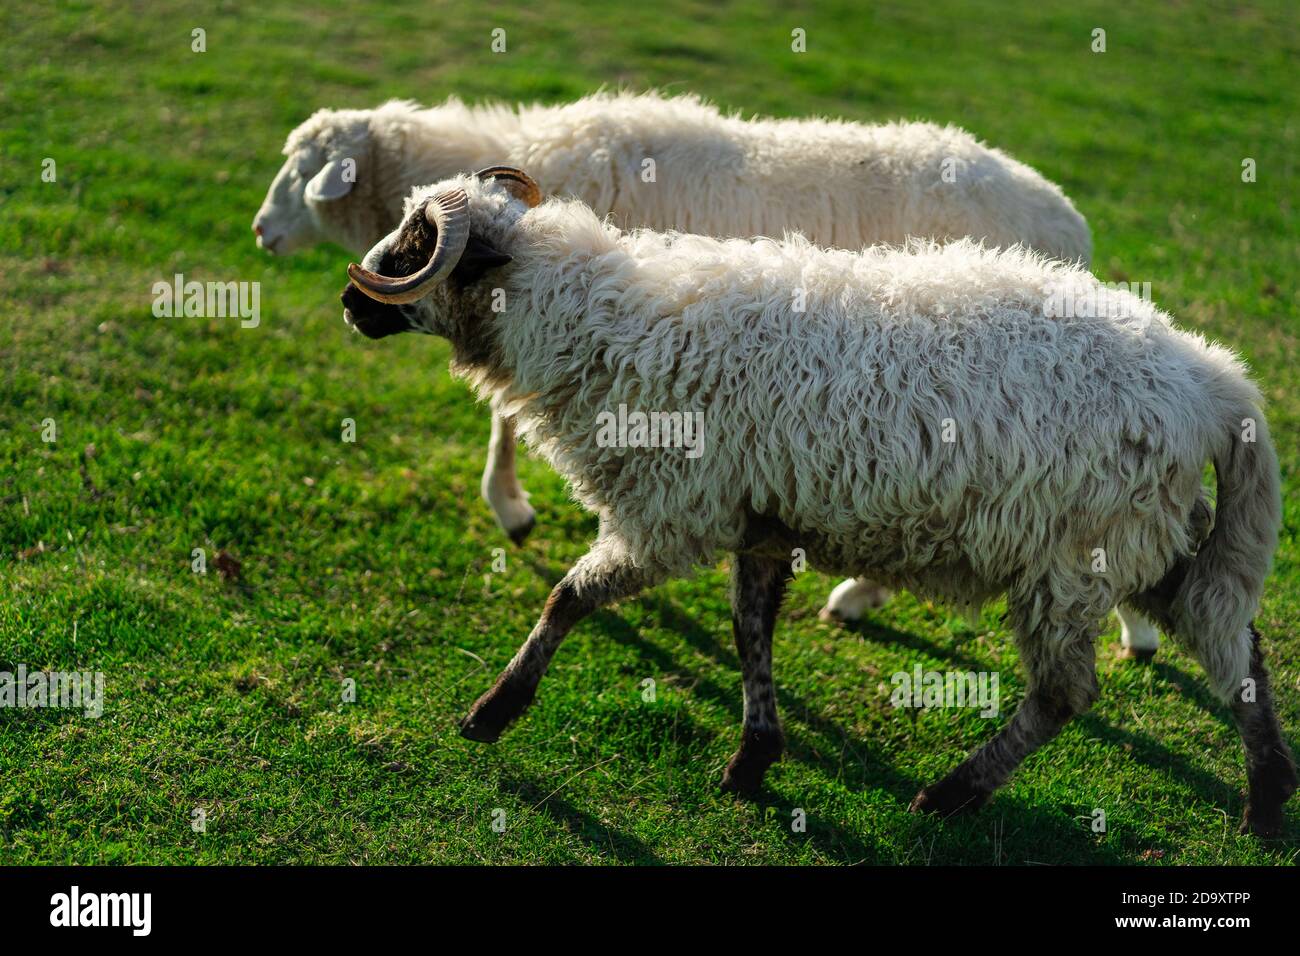 White fluffy sheep nips grass in a green meadow. Nature, beautiful animals  live in their habitat. Cute animal on the farm Stock Photo - Alamy